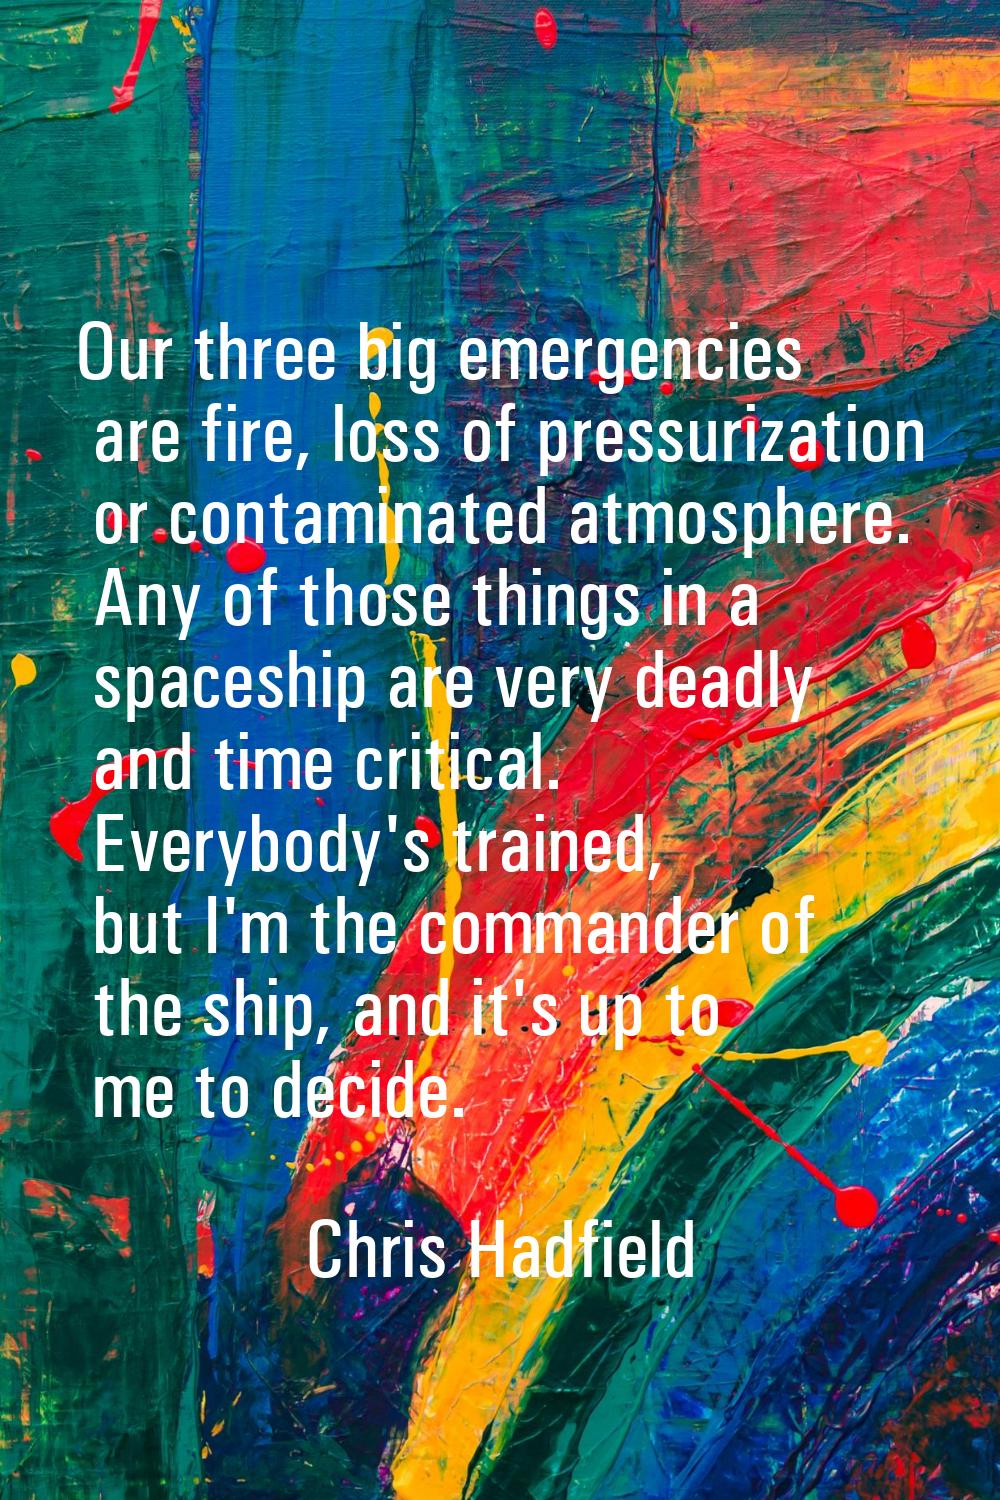 Our three big emergencies are fire, loss of pressurization or contaminated atmosphere. Any of those